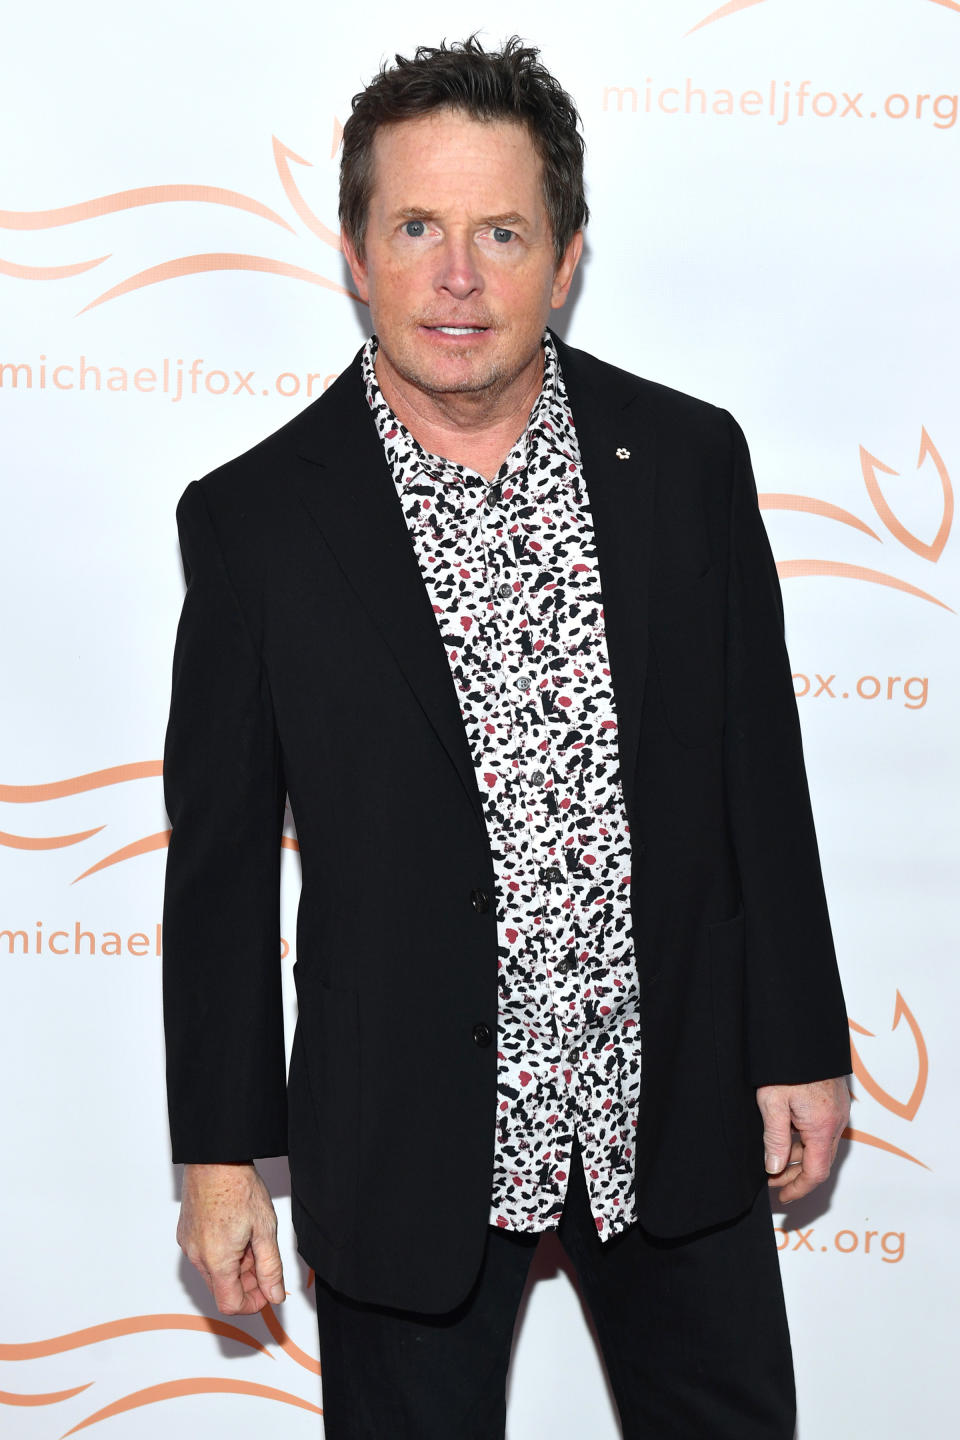   Noam Galai / Getty Images for The Michael J. Fox Foundation